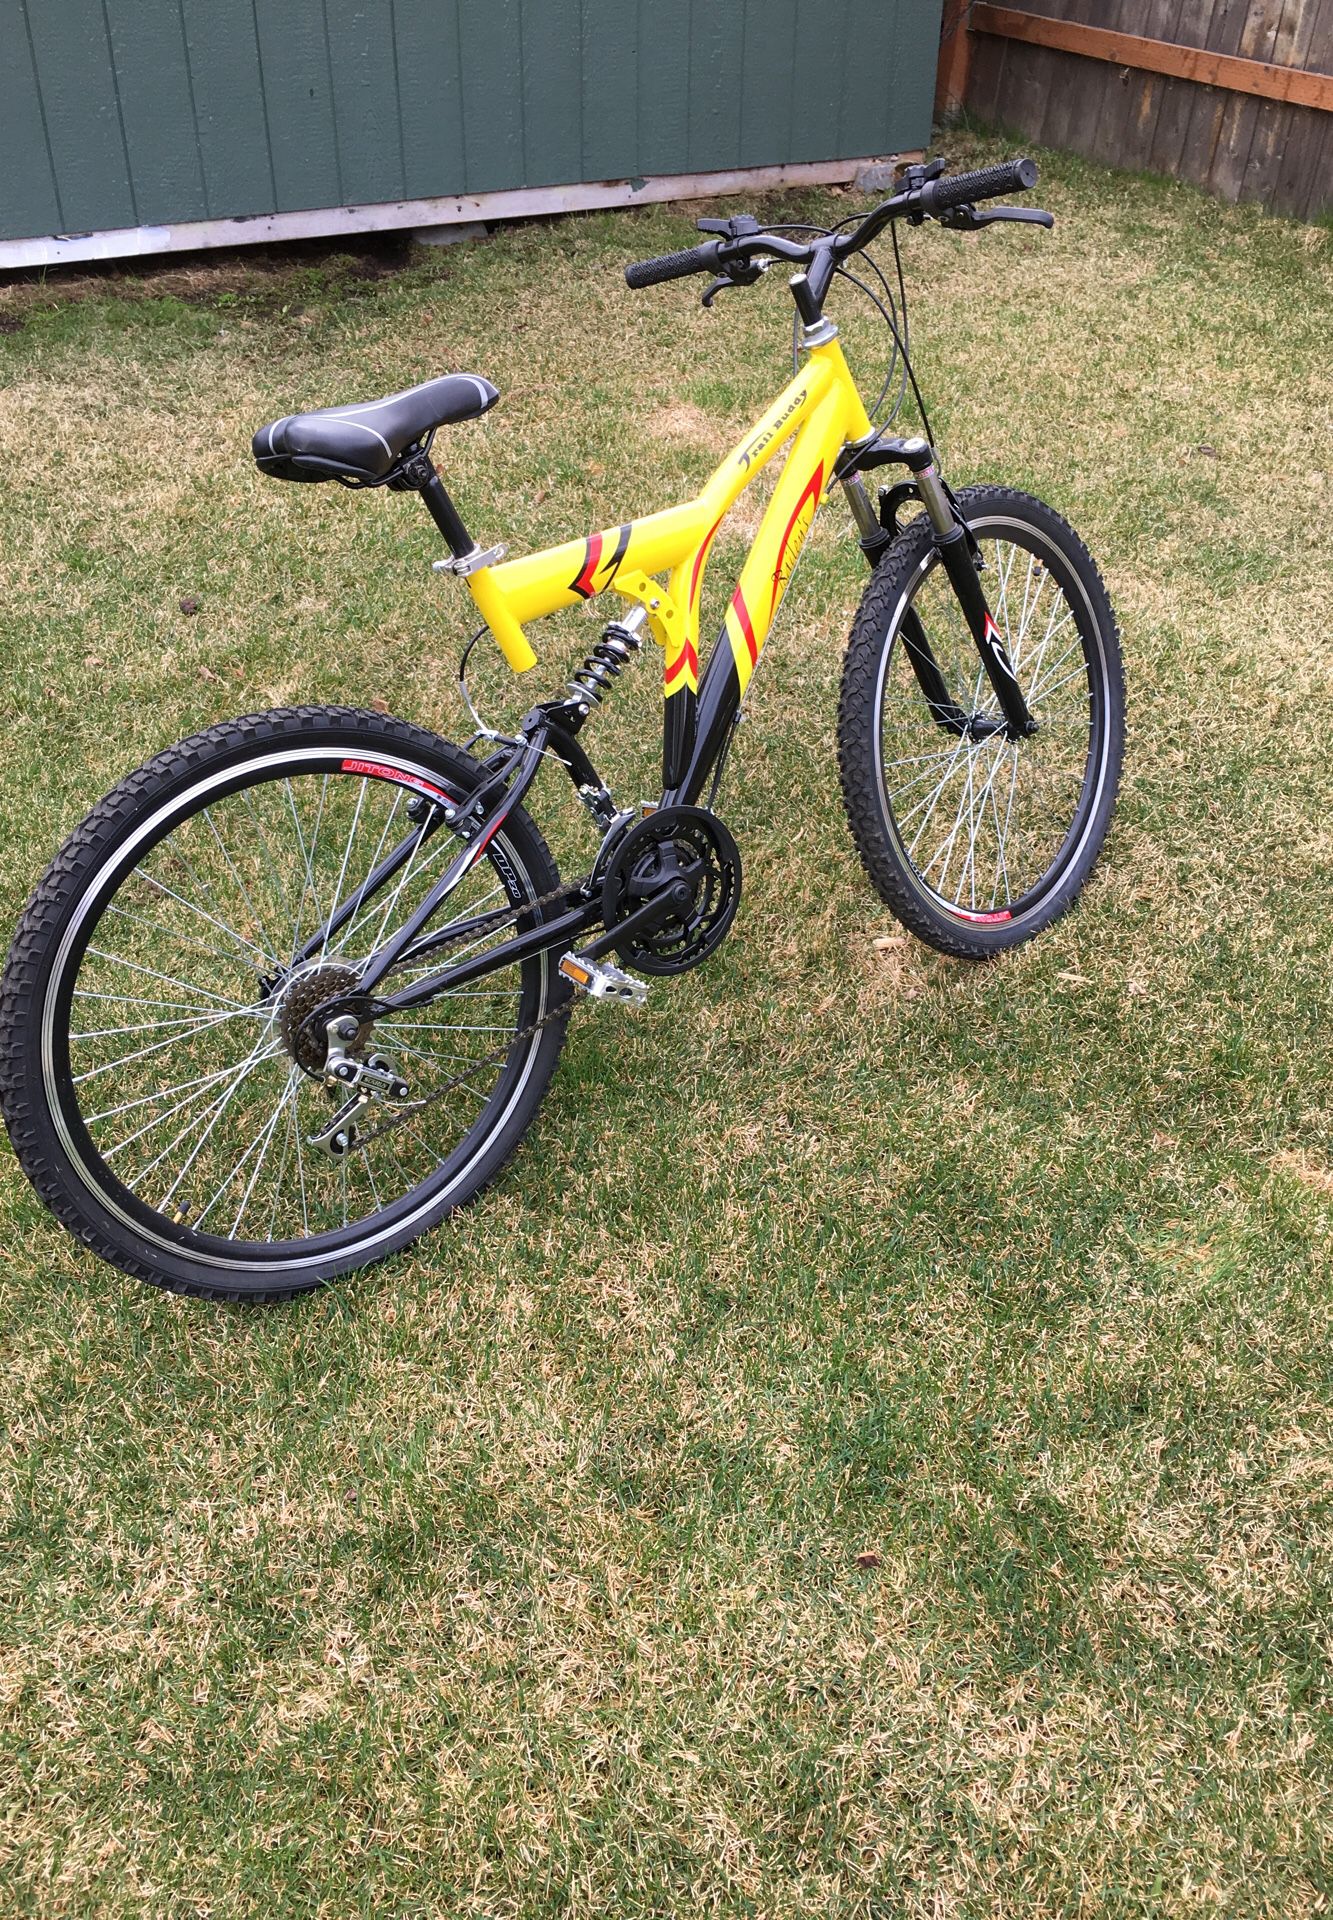 Brand new Trail Buddy. Mountain Bike. Never used. for Sale in Anchorage, AK  - OfferUp